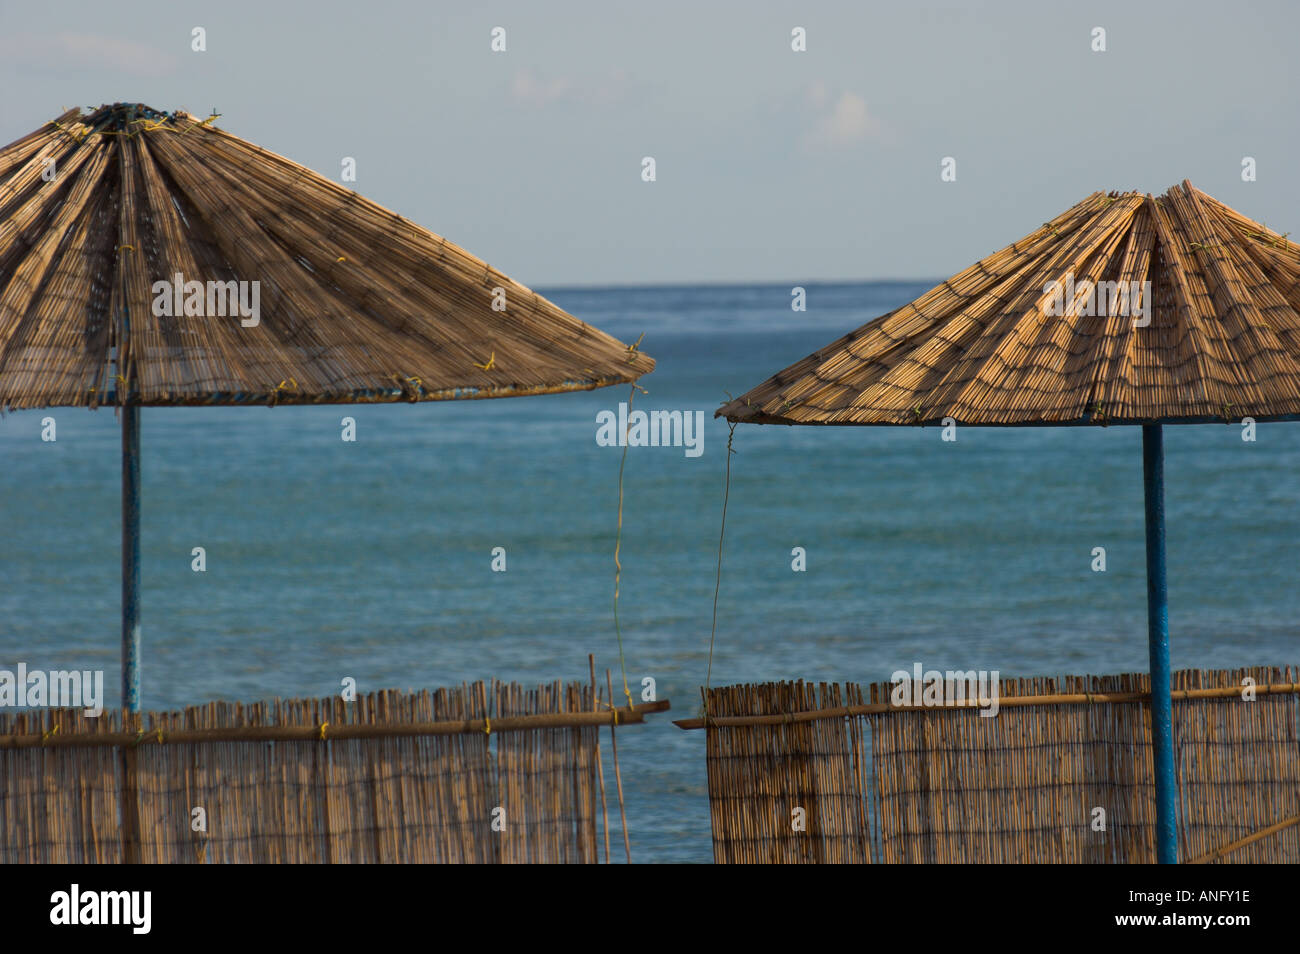 Greece Crete Ammoudara close up of 2 fine bamboo beach umbrellas and wind protection with sea in bkgd Stock Photo